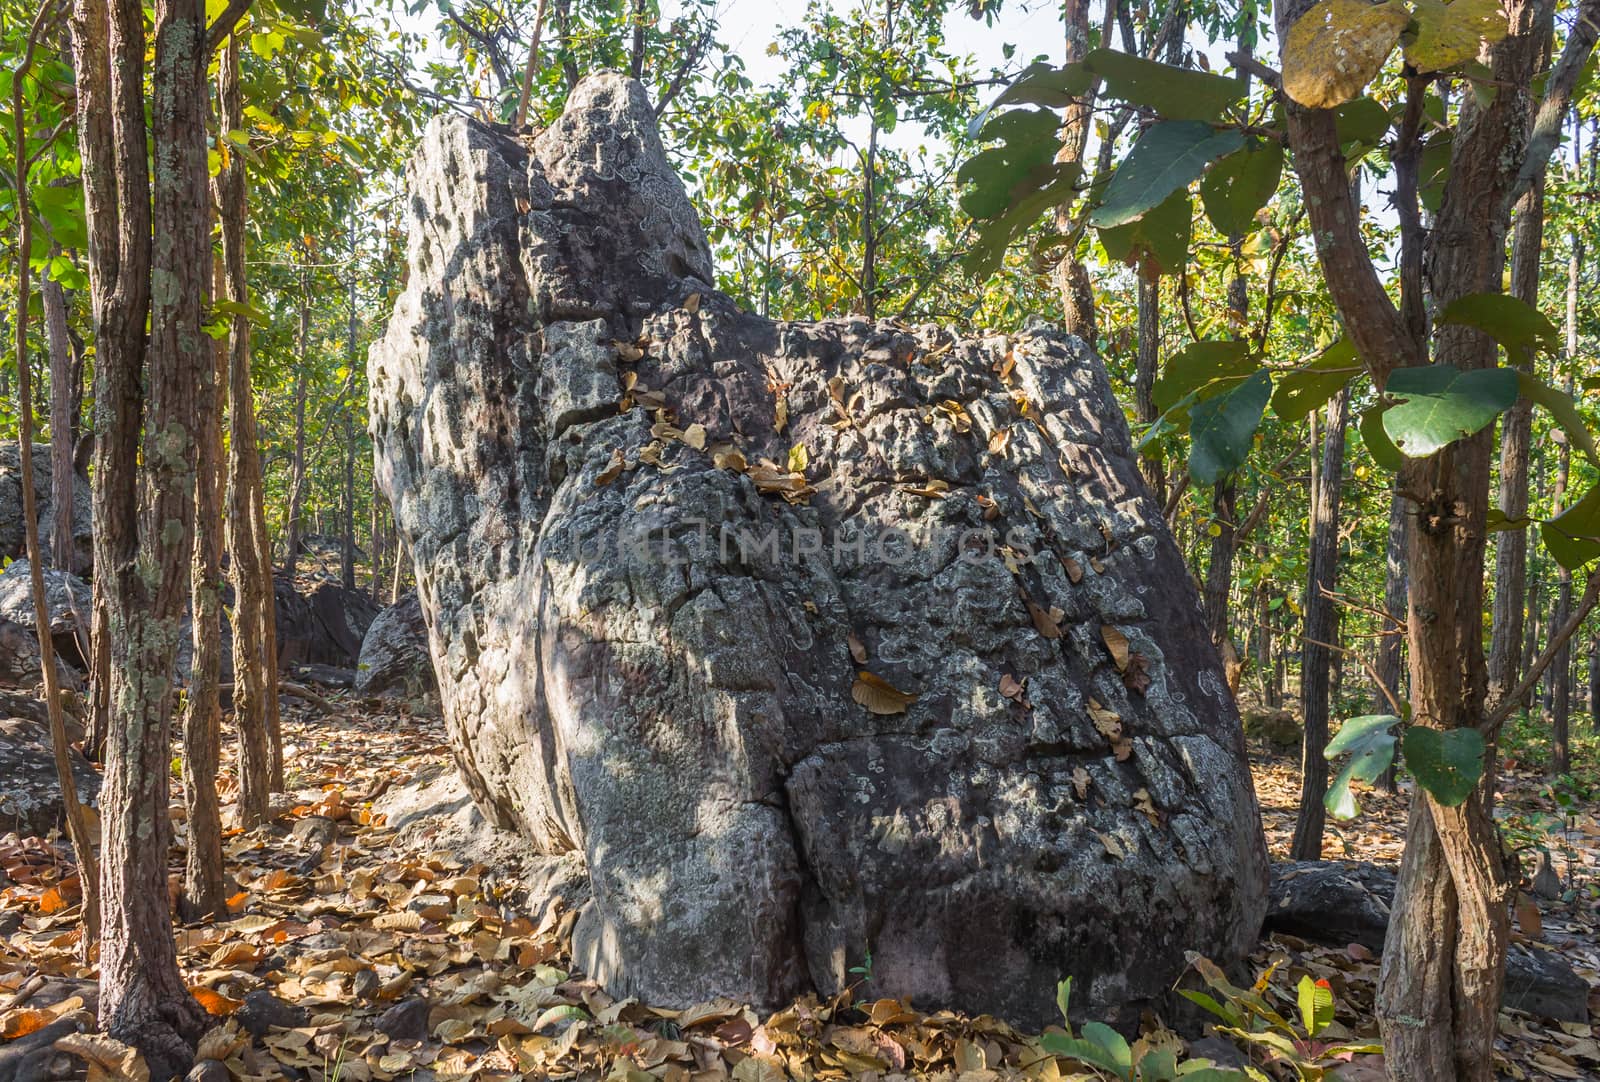 King Seat Stone or Rock at Phayao Attractions Northern Thailand Travel Back. Natural rock or stone is called King Seat at Phayao landmark northern Thailand travel